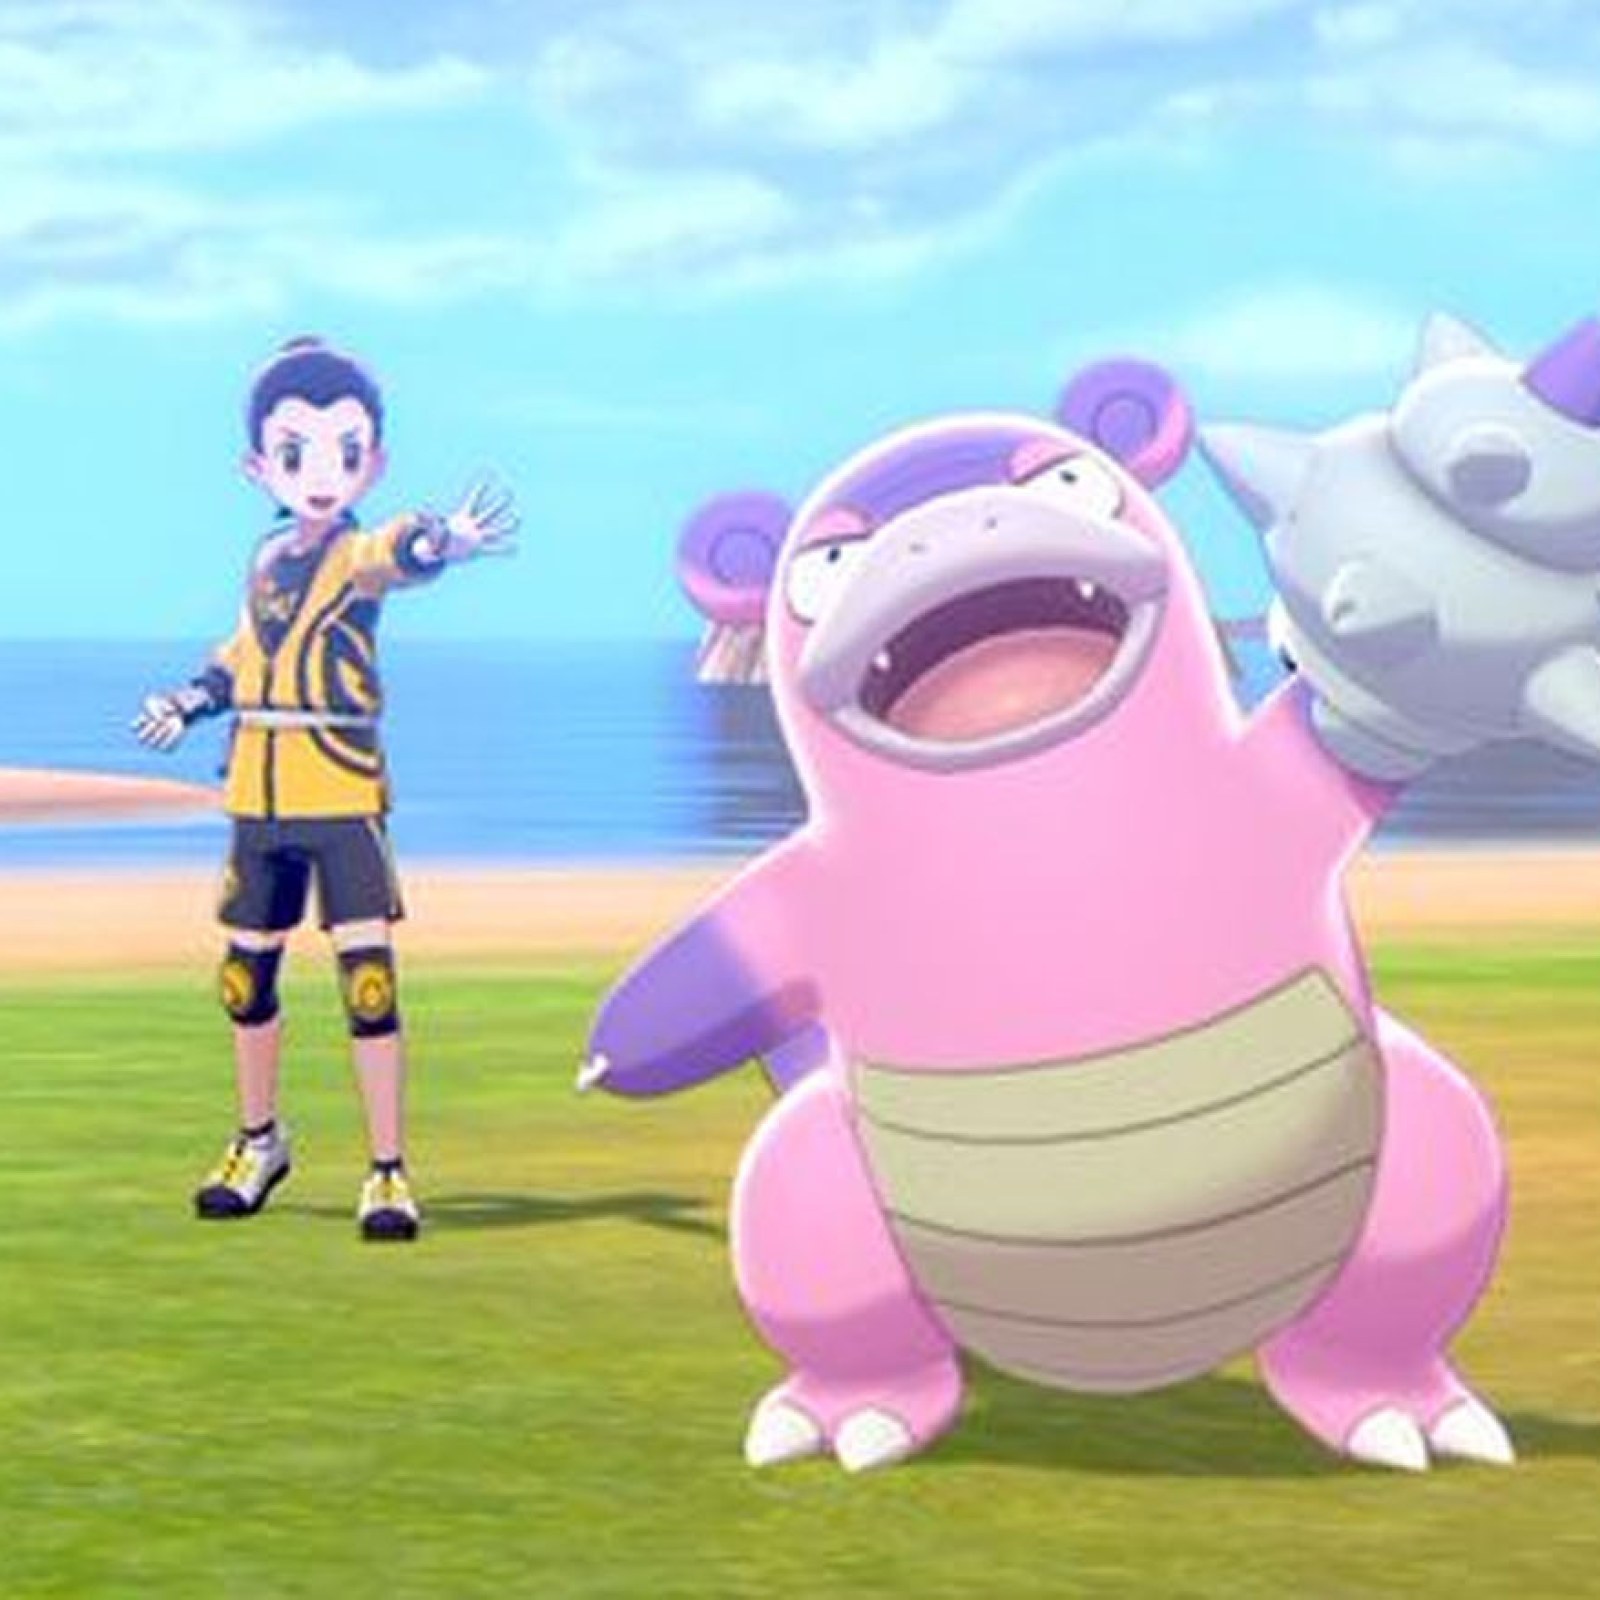 Pokemon Sword And Shield Isle Of Armor Dlc Release Time When And How To Download Expansion